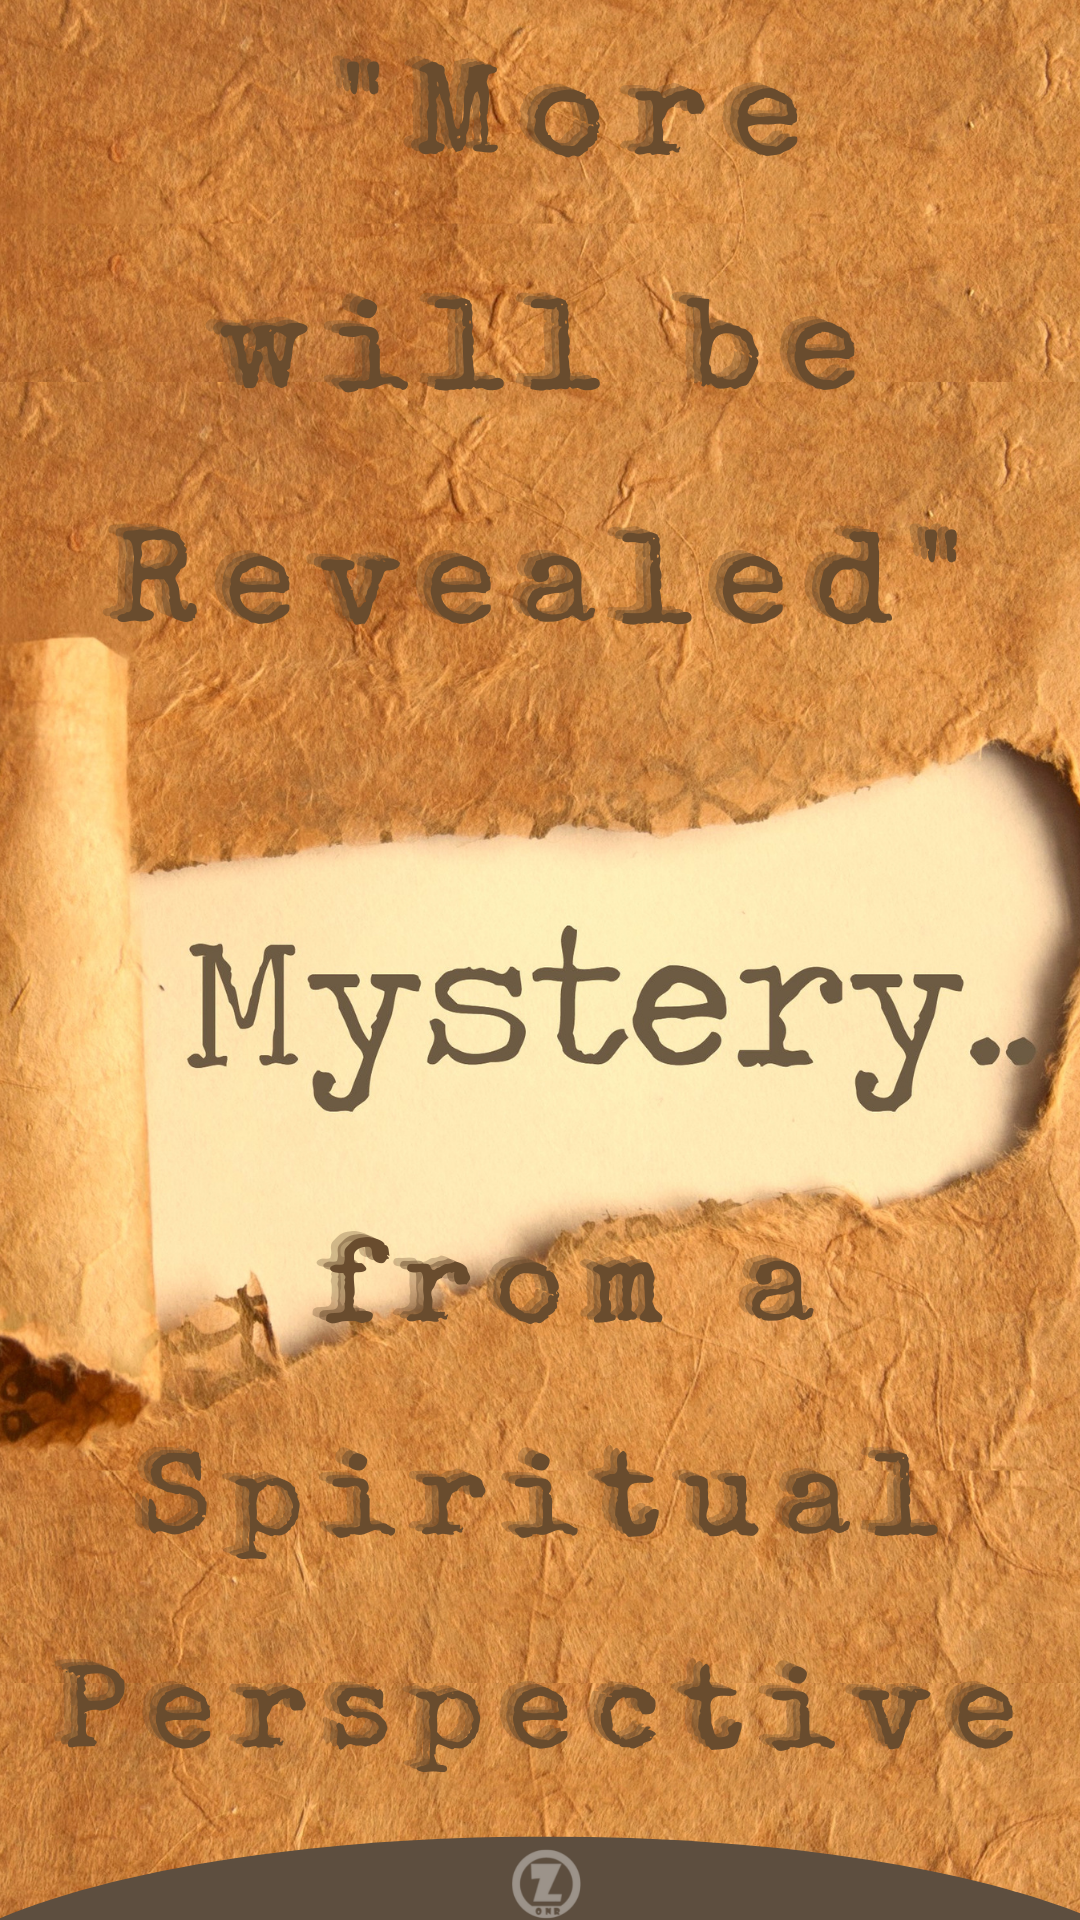 You are currently viewing “More will be Revealed” The Mystery from a Spiritual Perspective – Step 3